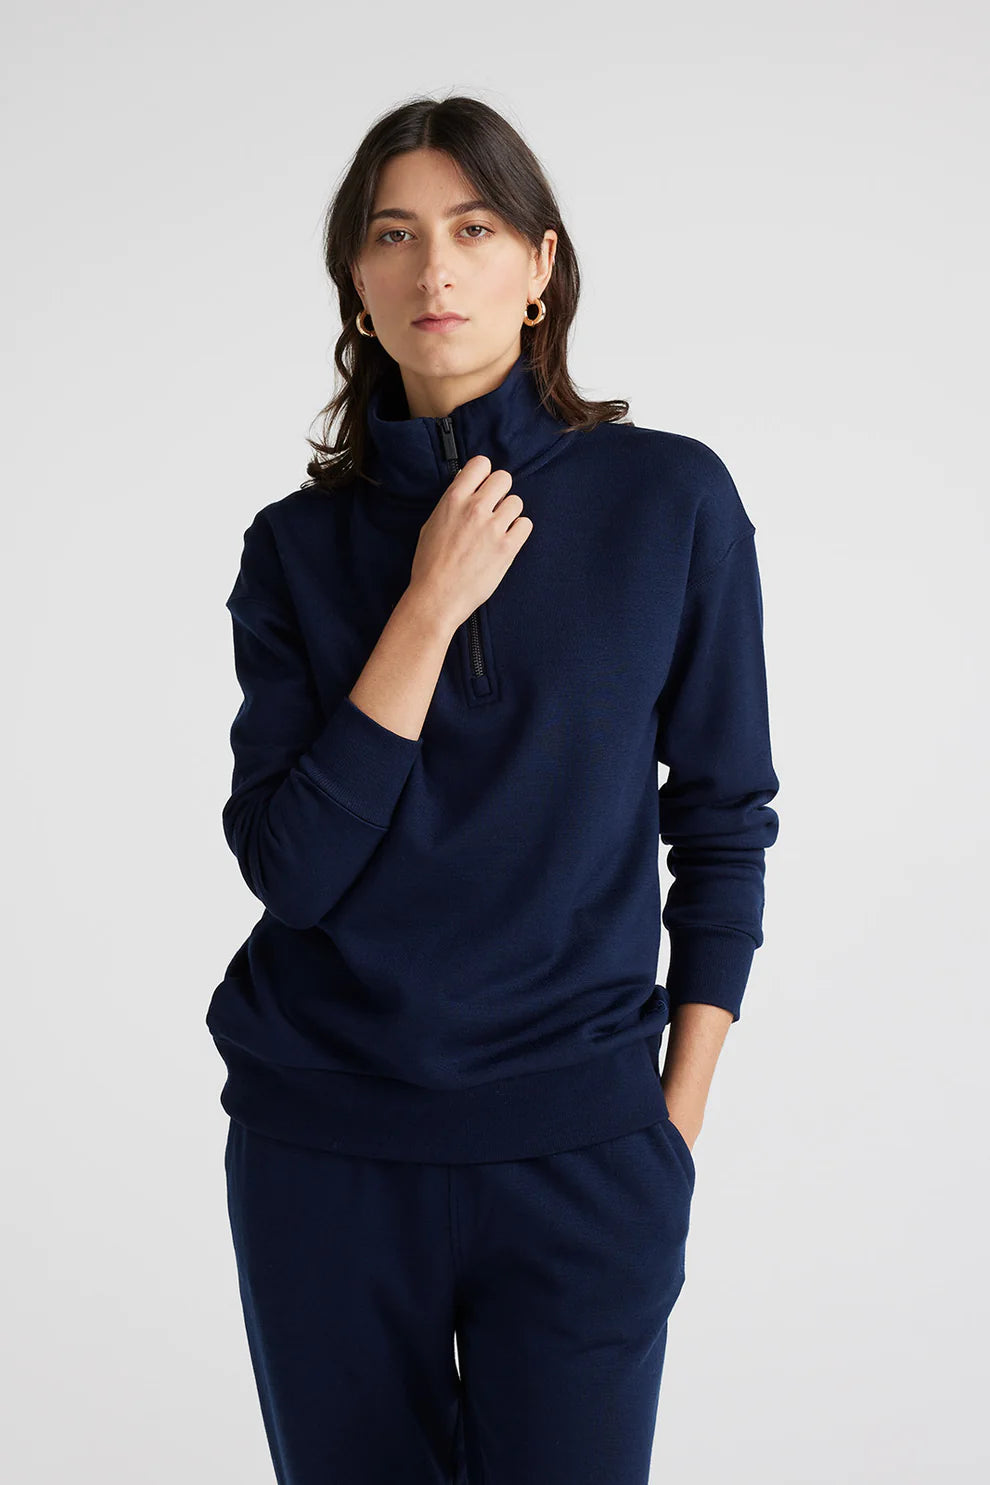 "Elevate your wardrobe with our navy Merino wool sweater. Zip collar adds a modern twist to classic elegance